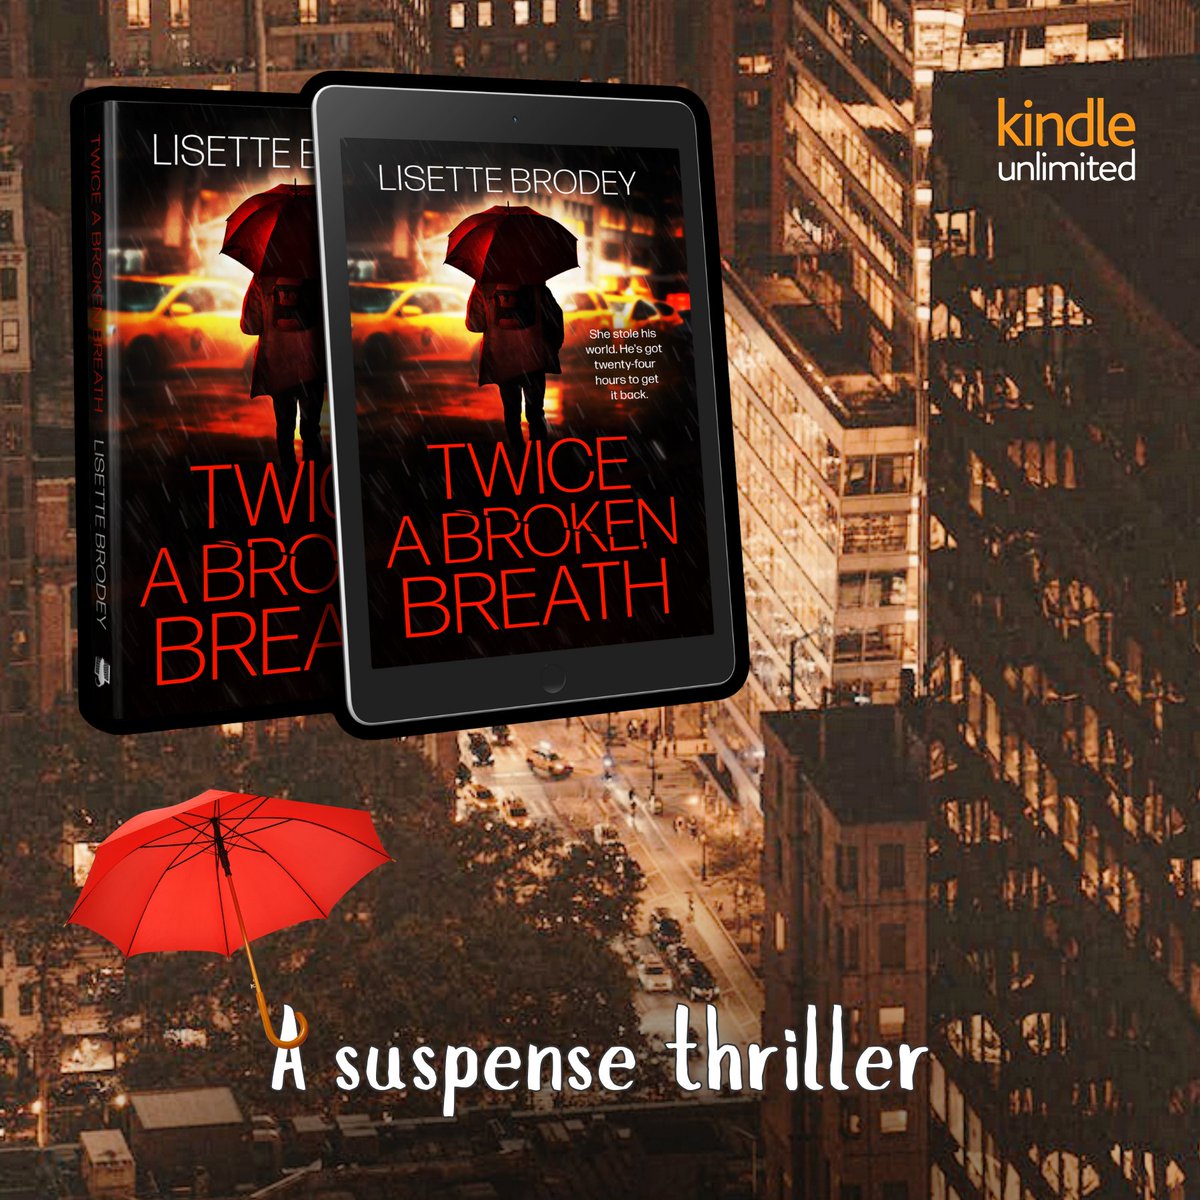 TWICE A BROKEN BREATH 🌆🚖 'A plethora of diverse characters brings a realism to the incredible plot.' ☔️💦 'An exciting page-turner for those who like a #thriller with heart. mybook.to/TwiceBroken 📕 #NYC 💥 #suspense 💥 #KU